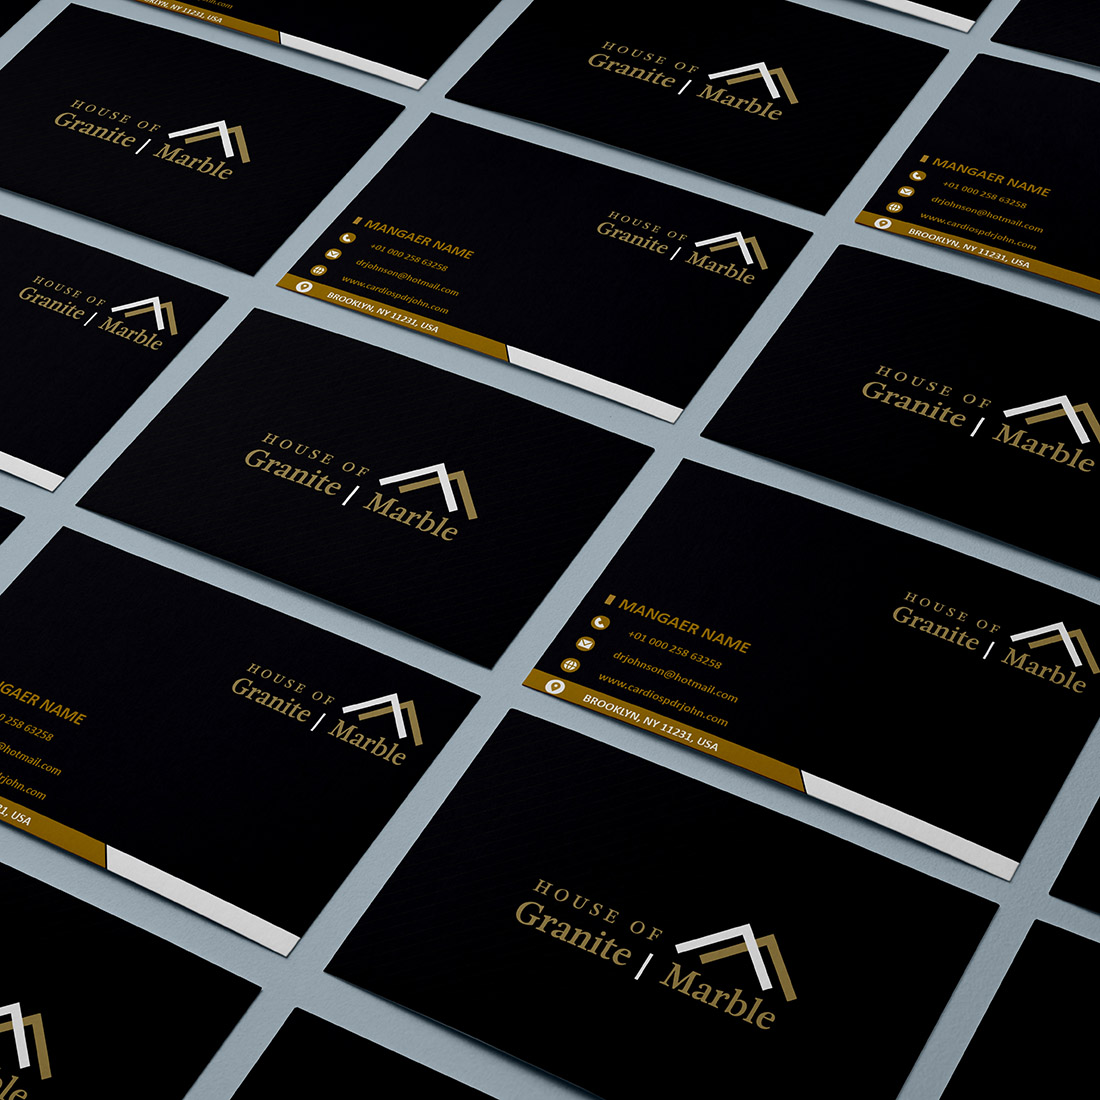 House of Granite Marble Profesional Business Card preview image.